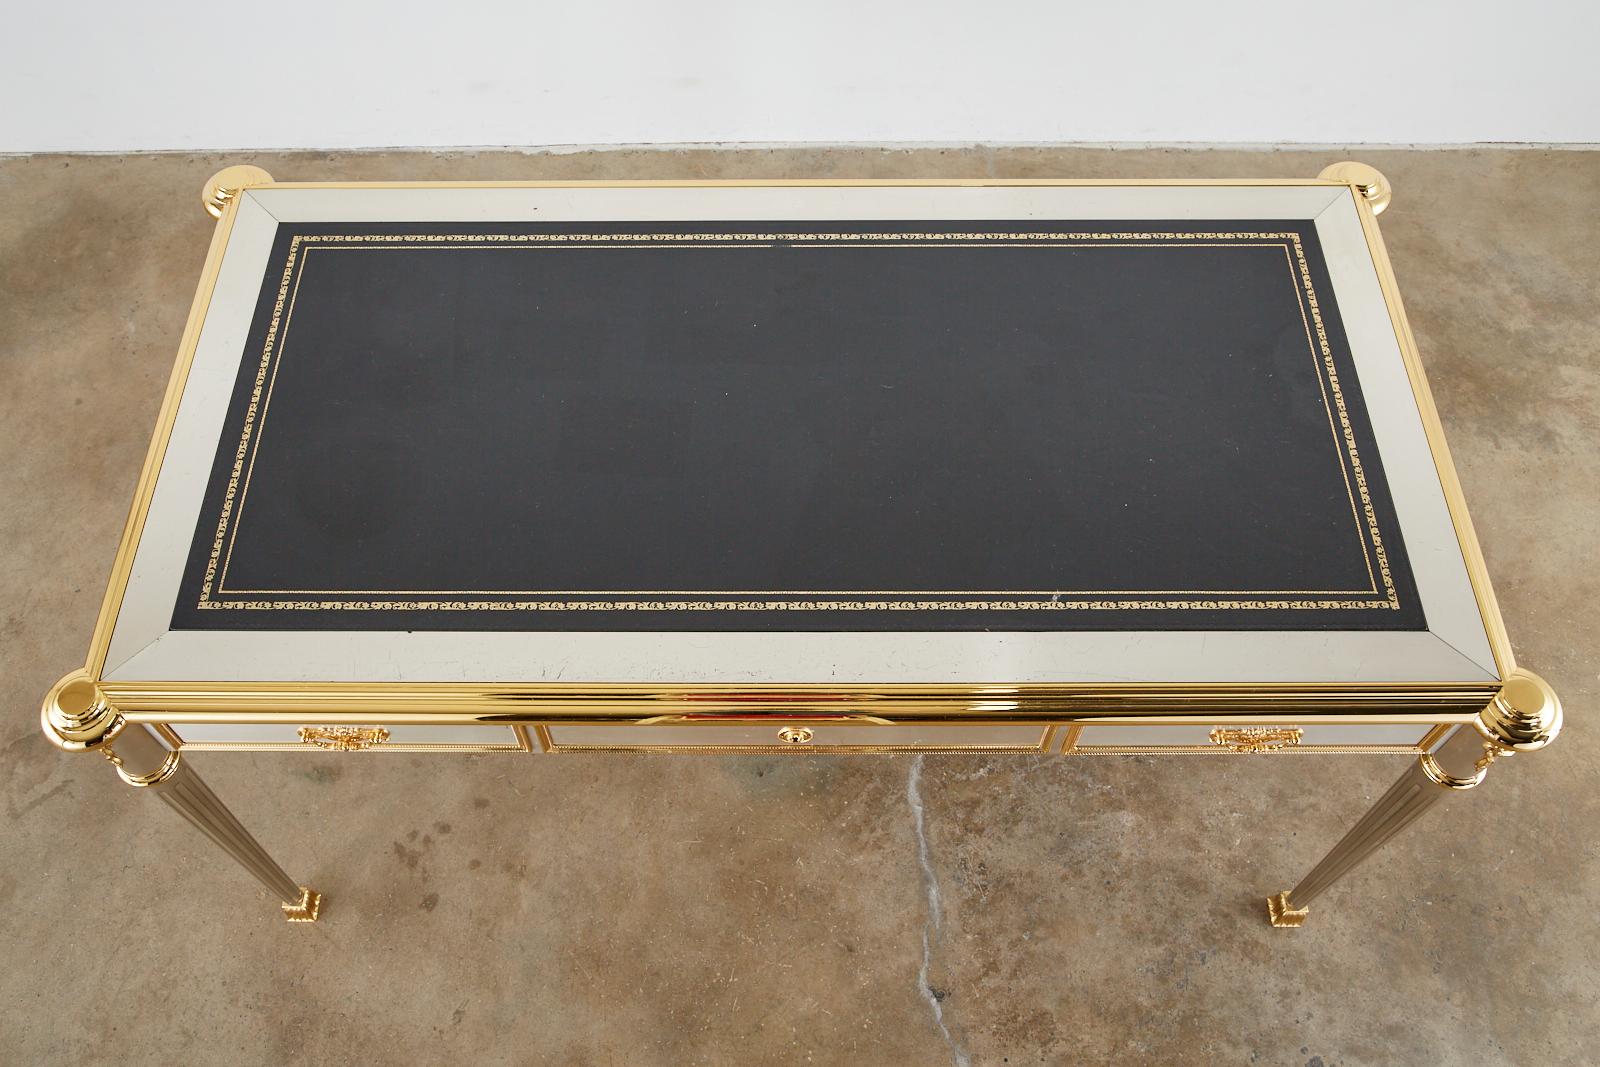 John Vesey Stainless Steel Bronze Neoclassical Desk In Good Condition For Sale In Rio Vista, CA